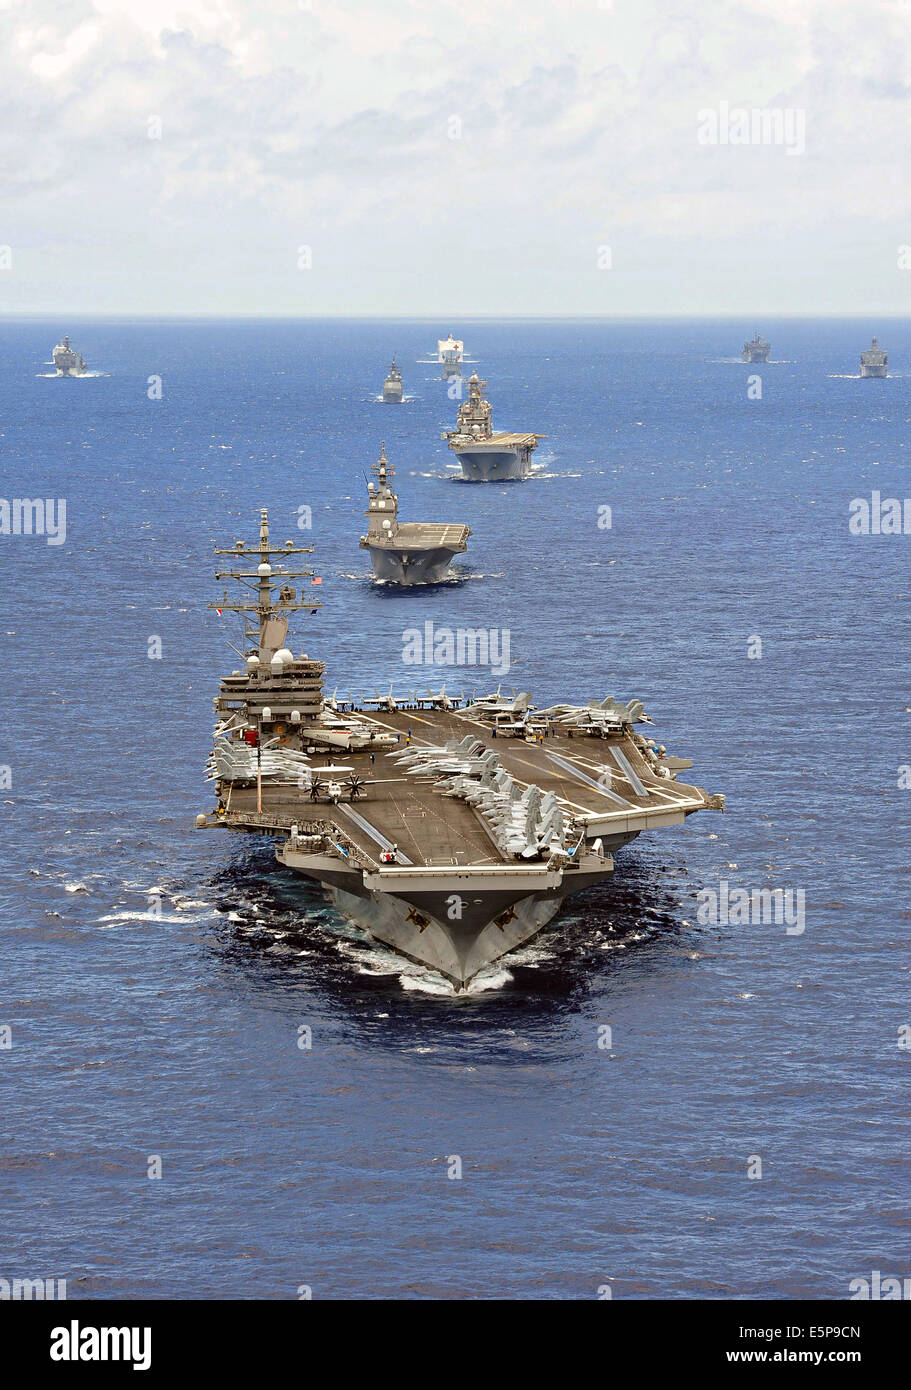 The US Navy Nimitz class aircraft carrier USS Ronald Reagan leads a close formation of 42 ships and submarines from 15 nations during Rim of the Pacific Exercise July 25, 2014 off the coast of Hawaii. Stock Photo